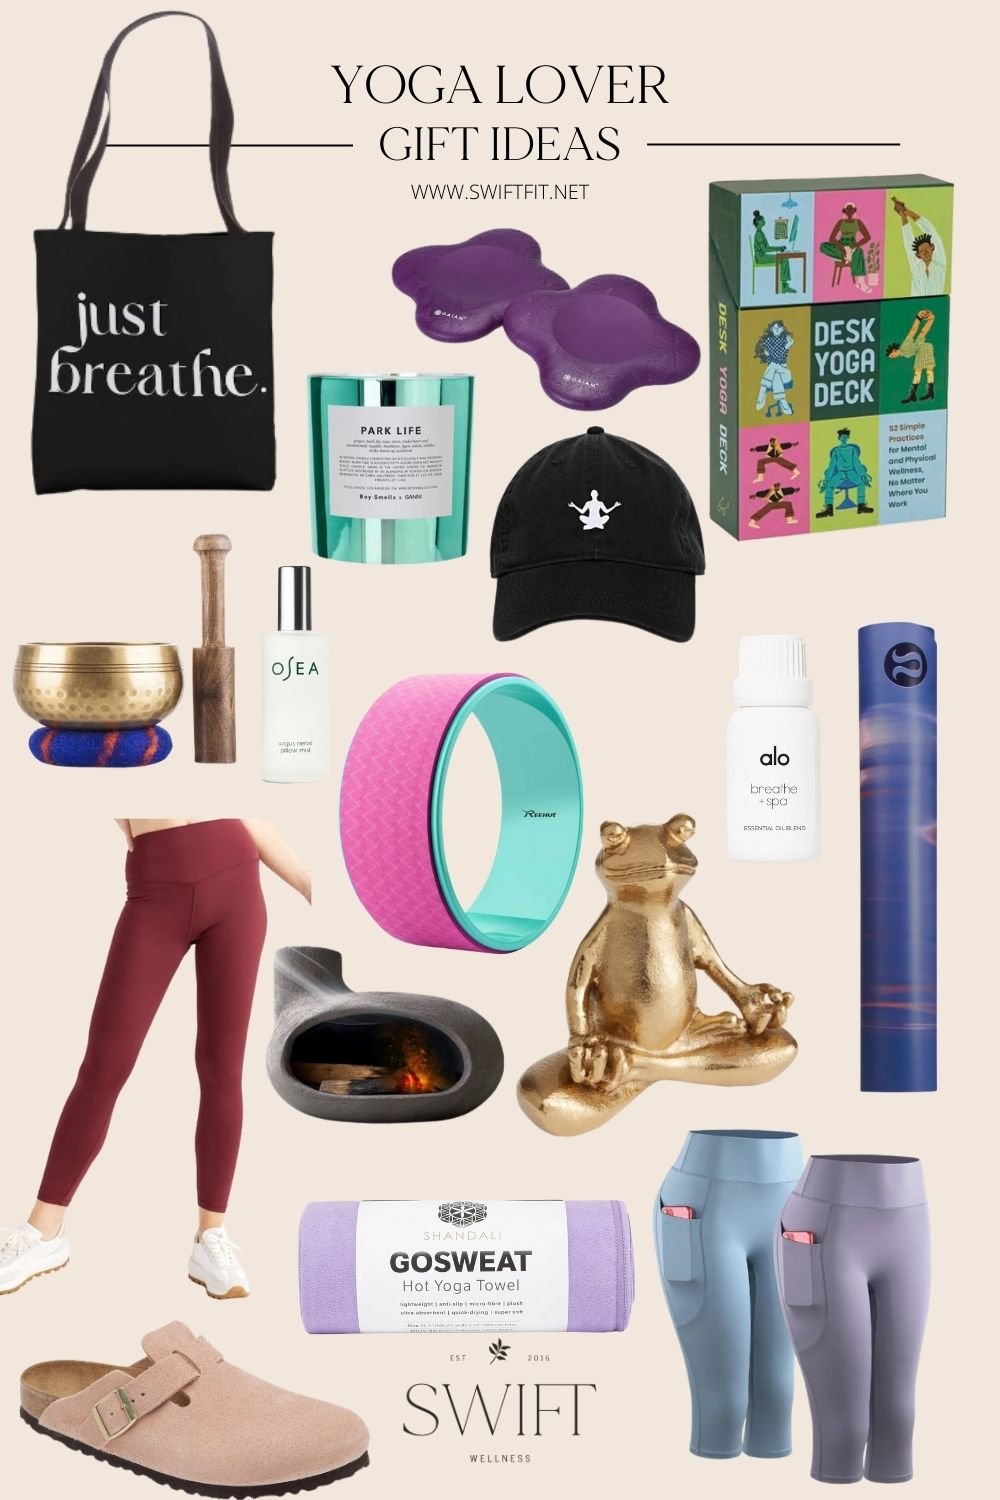 50 Gifts For Yoga Lovers That Won't Overstretch Your Budget